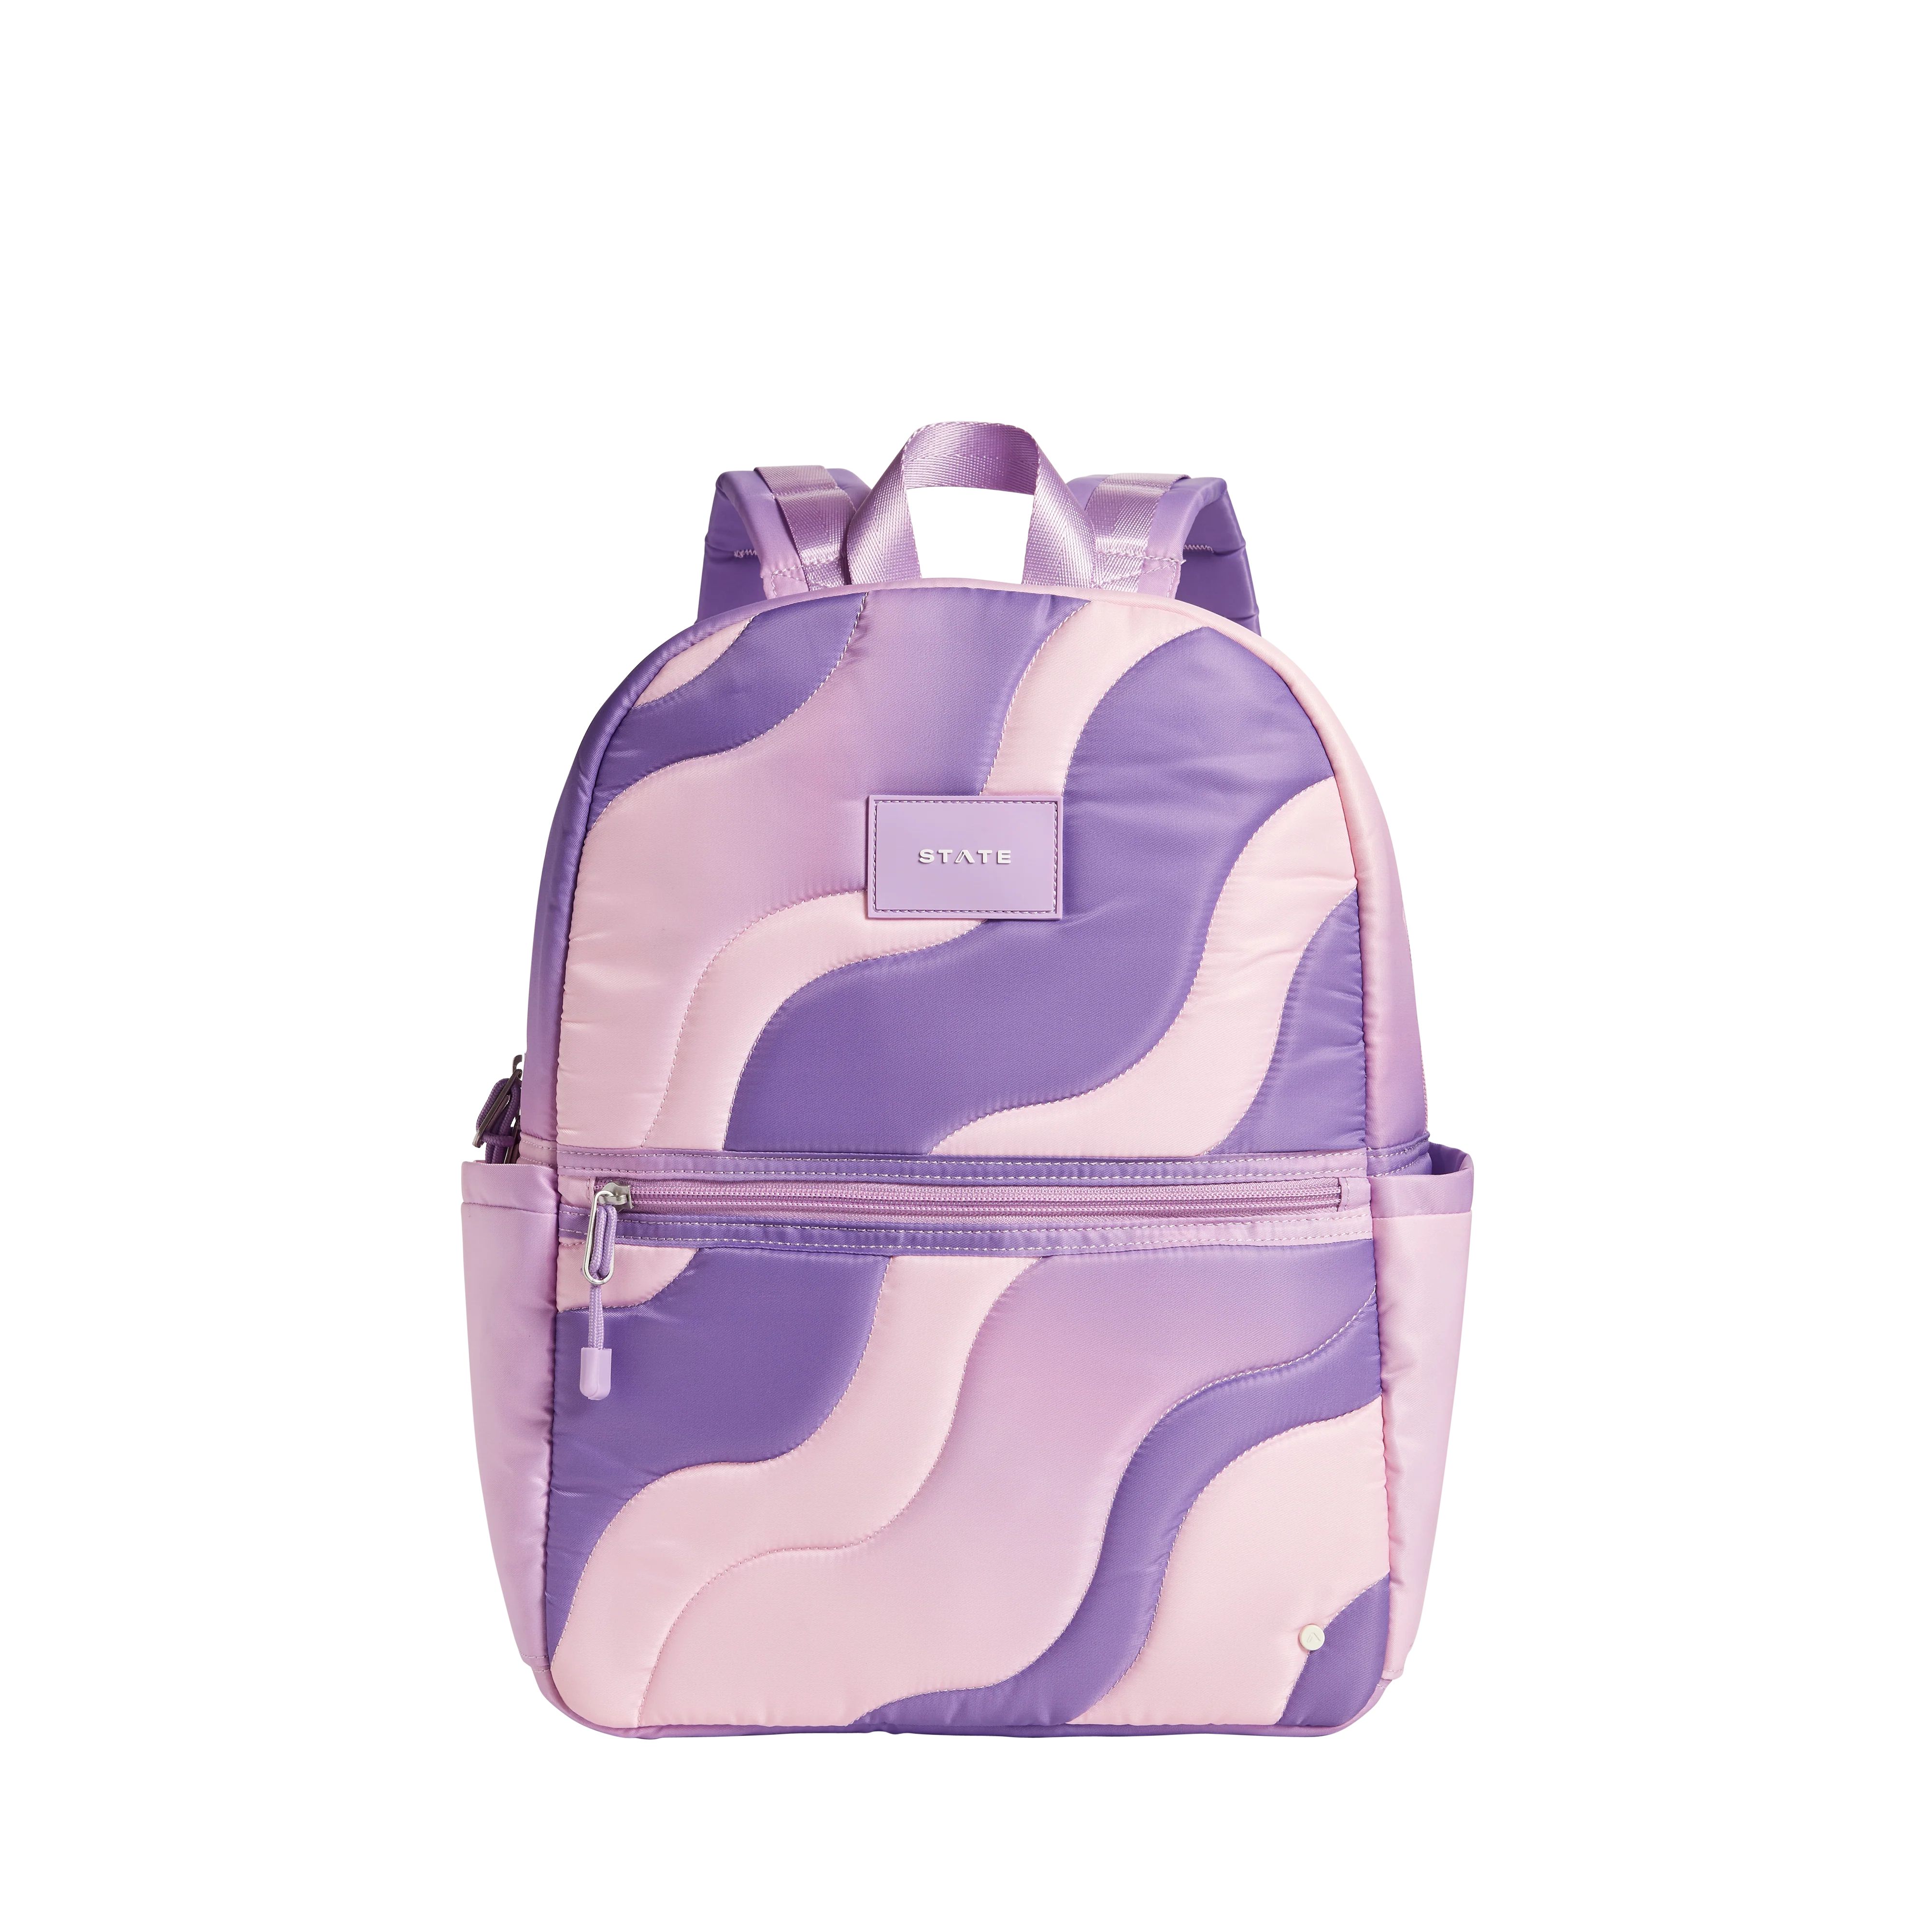 STATE Bags | Kane Kids Double Pocket Backpack Wiggly Puffer Purple | STATE Bags